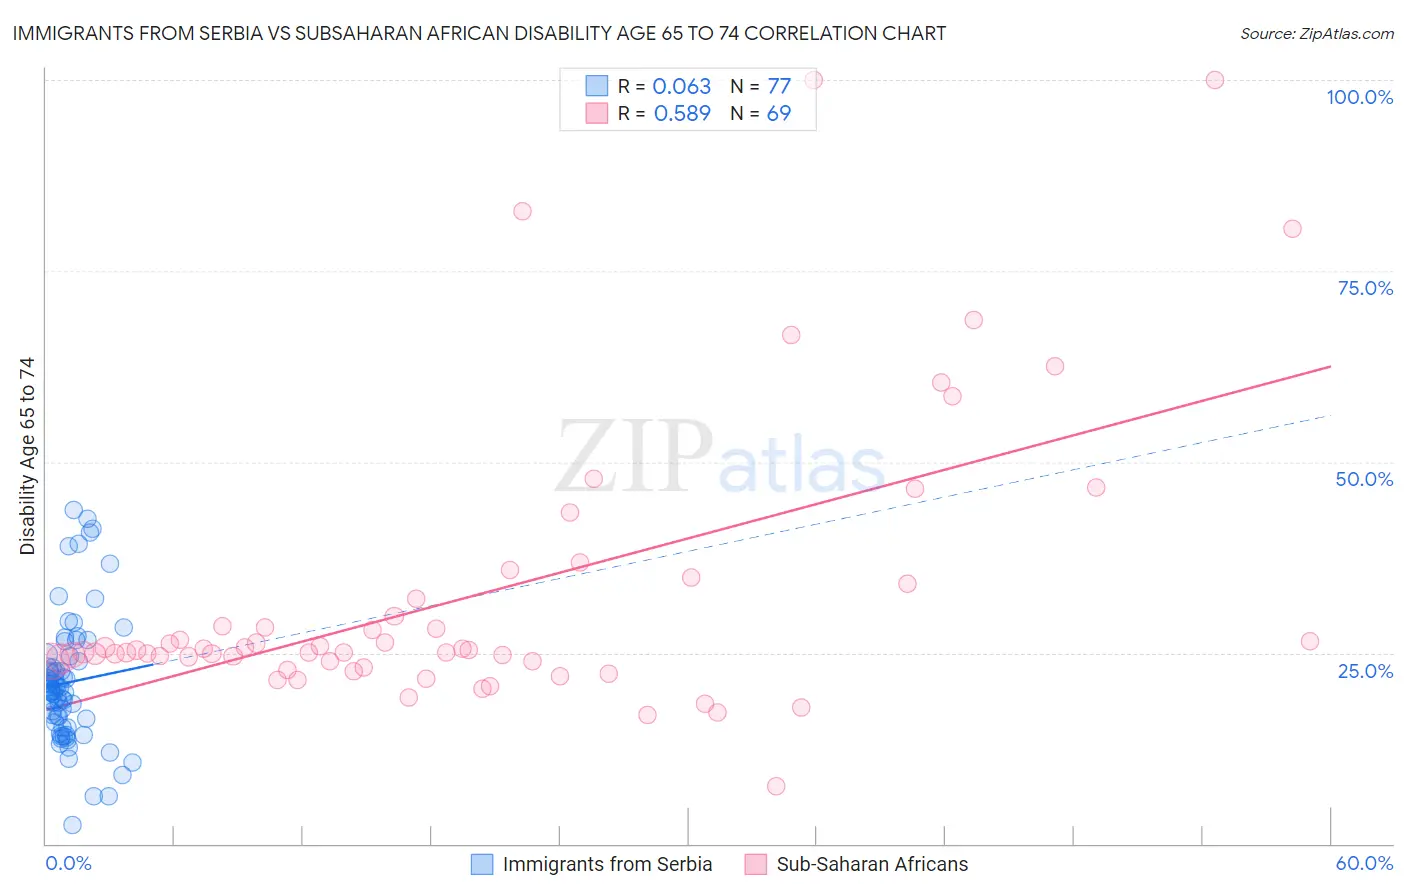 Immigrants from Serbia vs Subsaharan African Disability Age 65 to 74